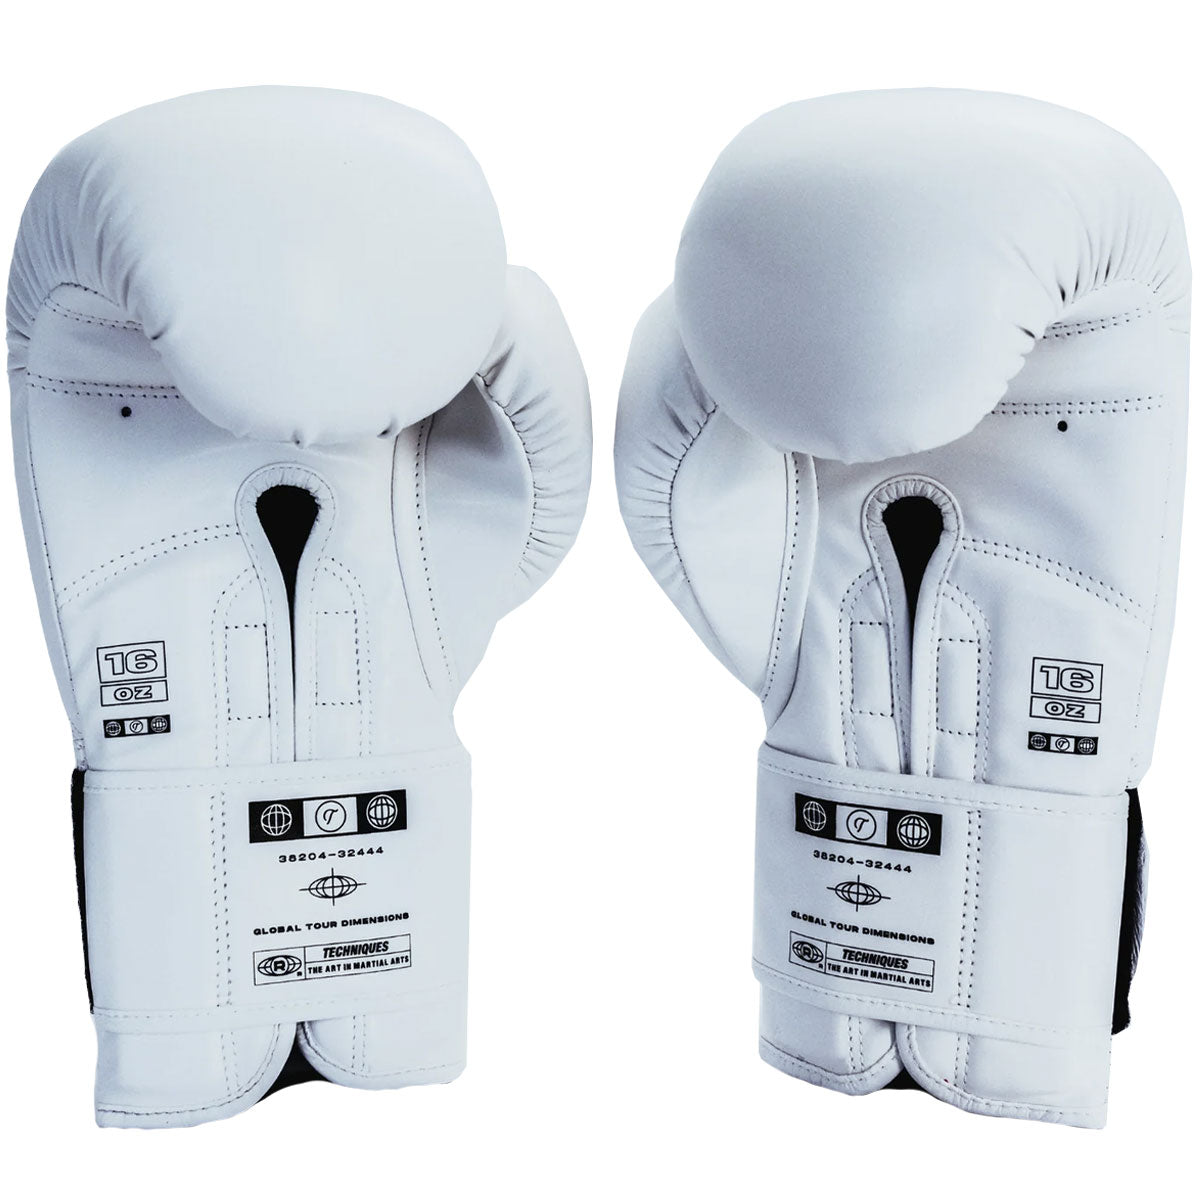 Boxing Gloves DST2 White Technique Canada